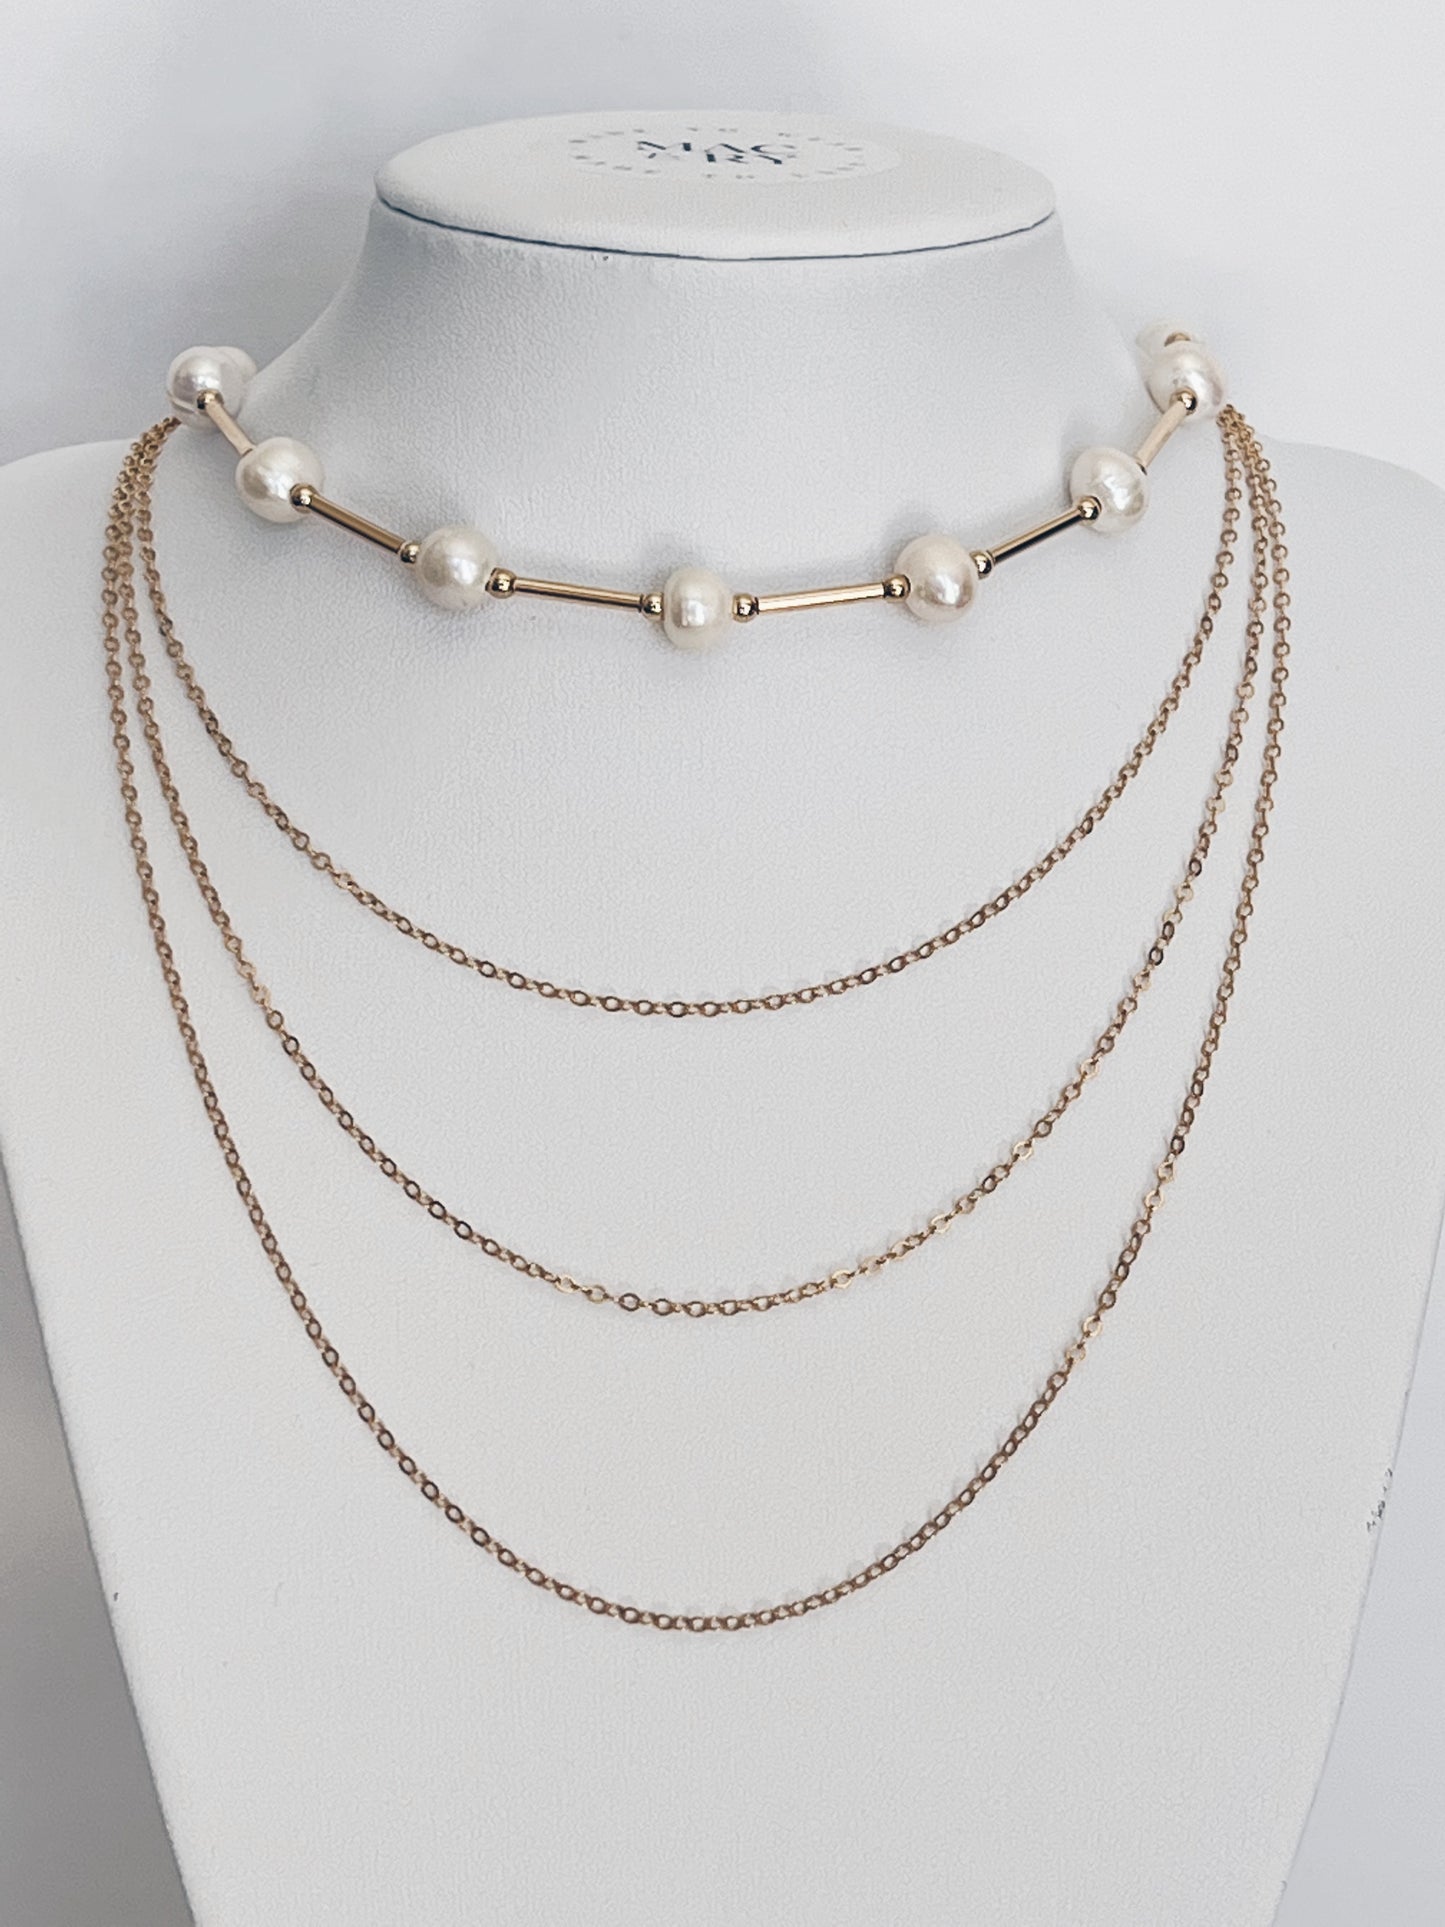 14k Gold Filled Triple Layered Chain Necklace